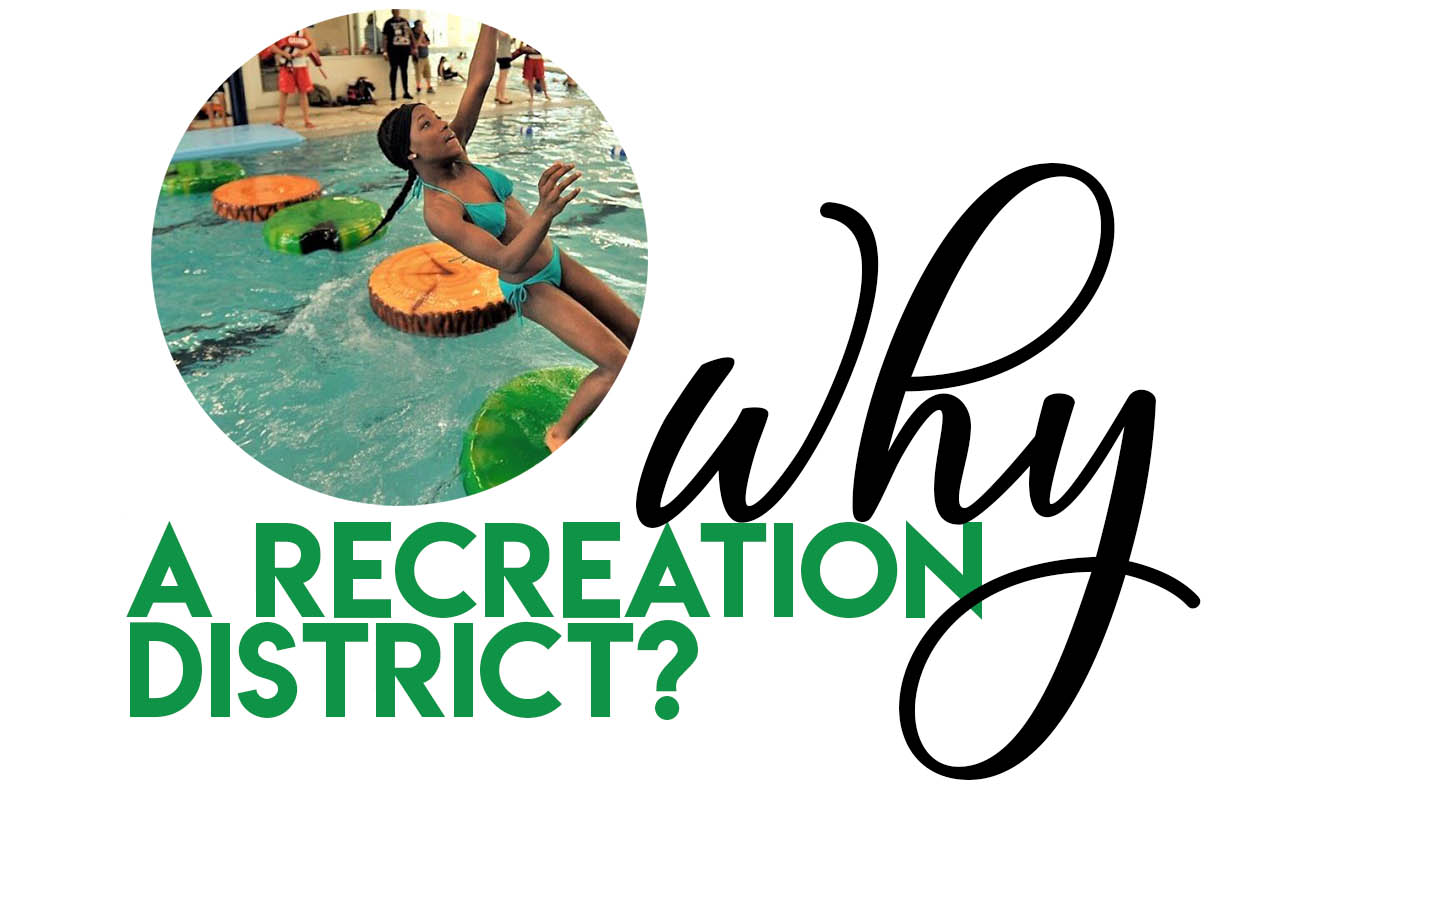 Why a recreation district?